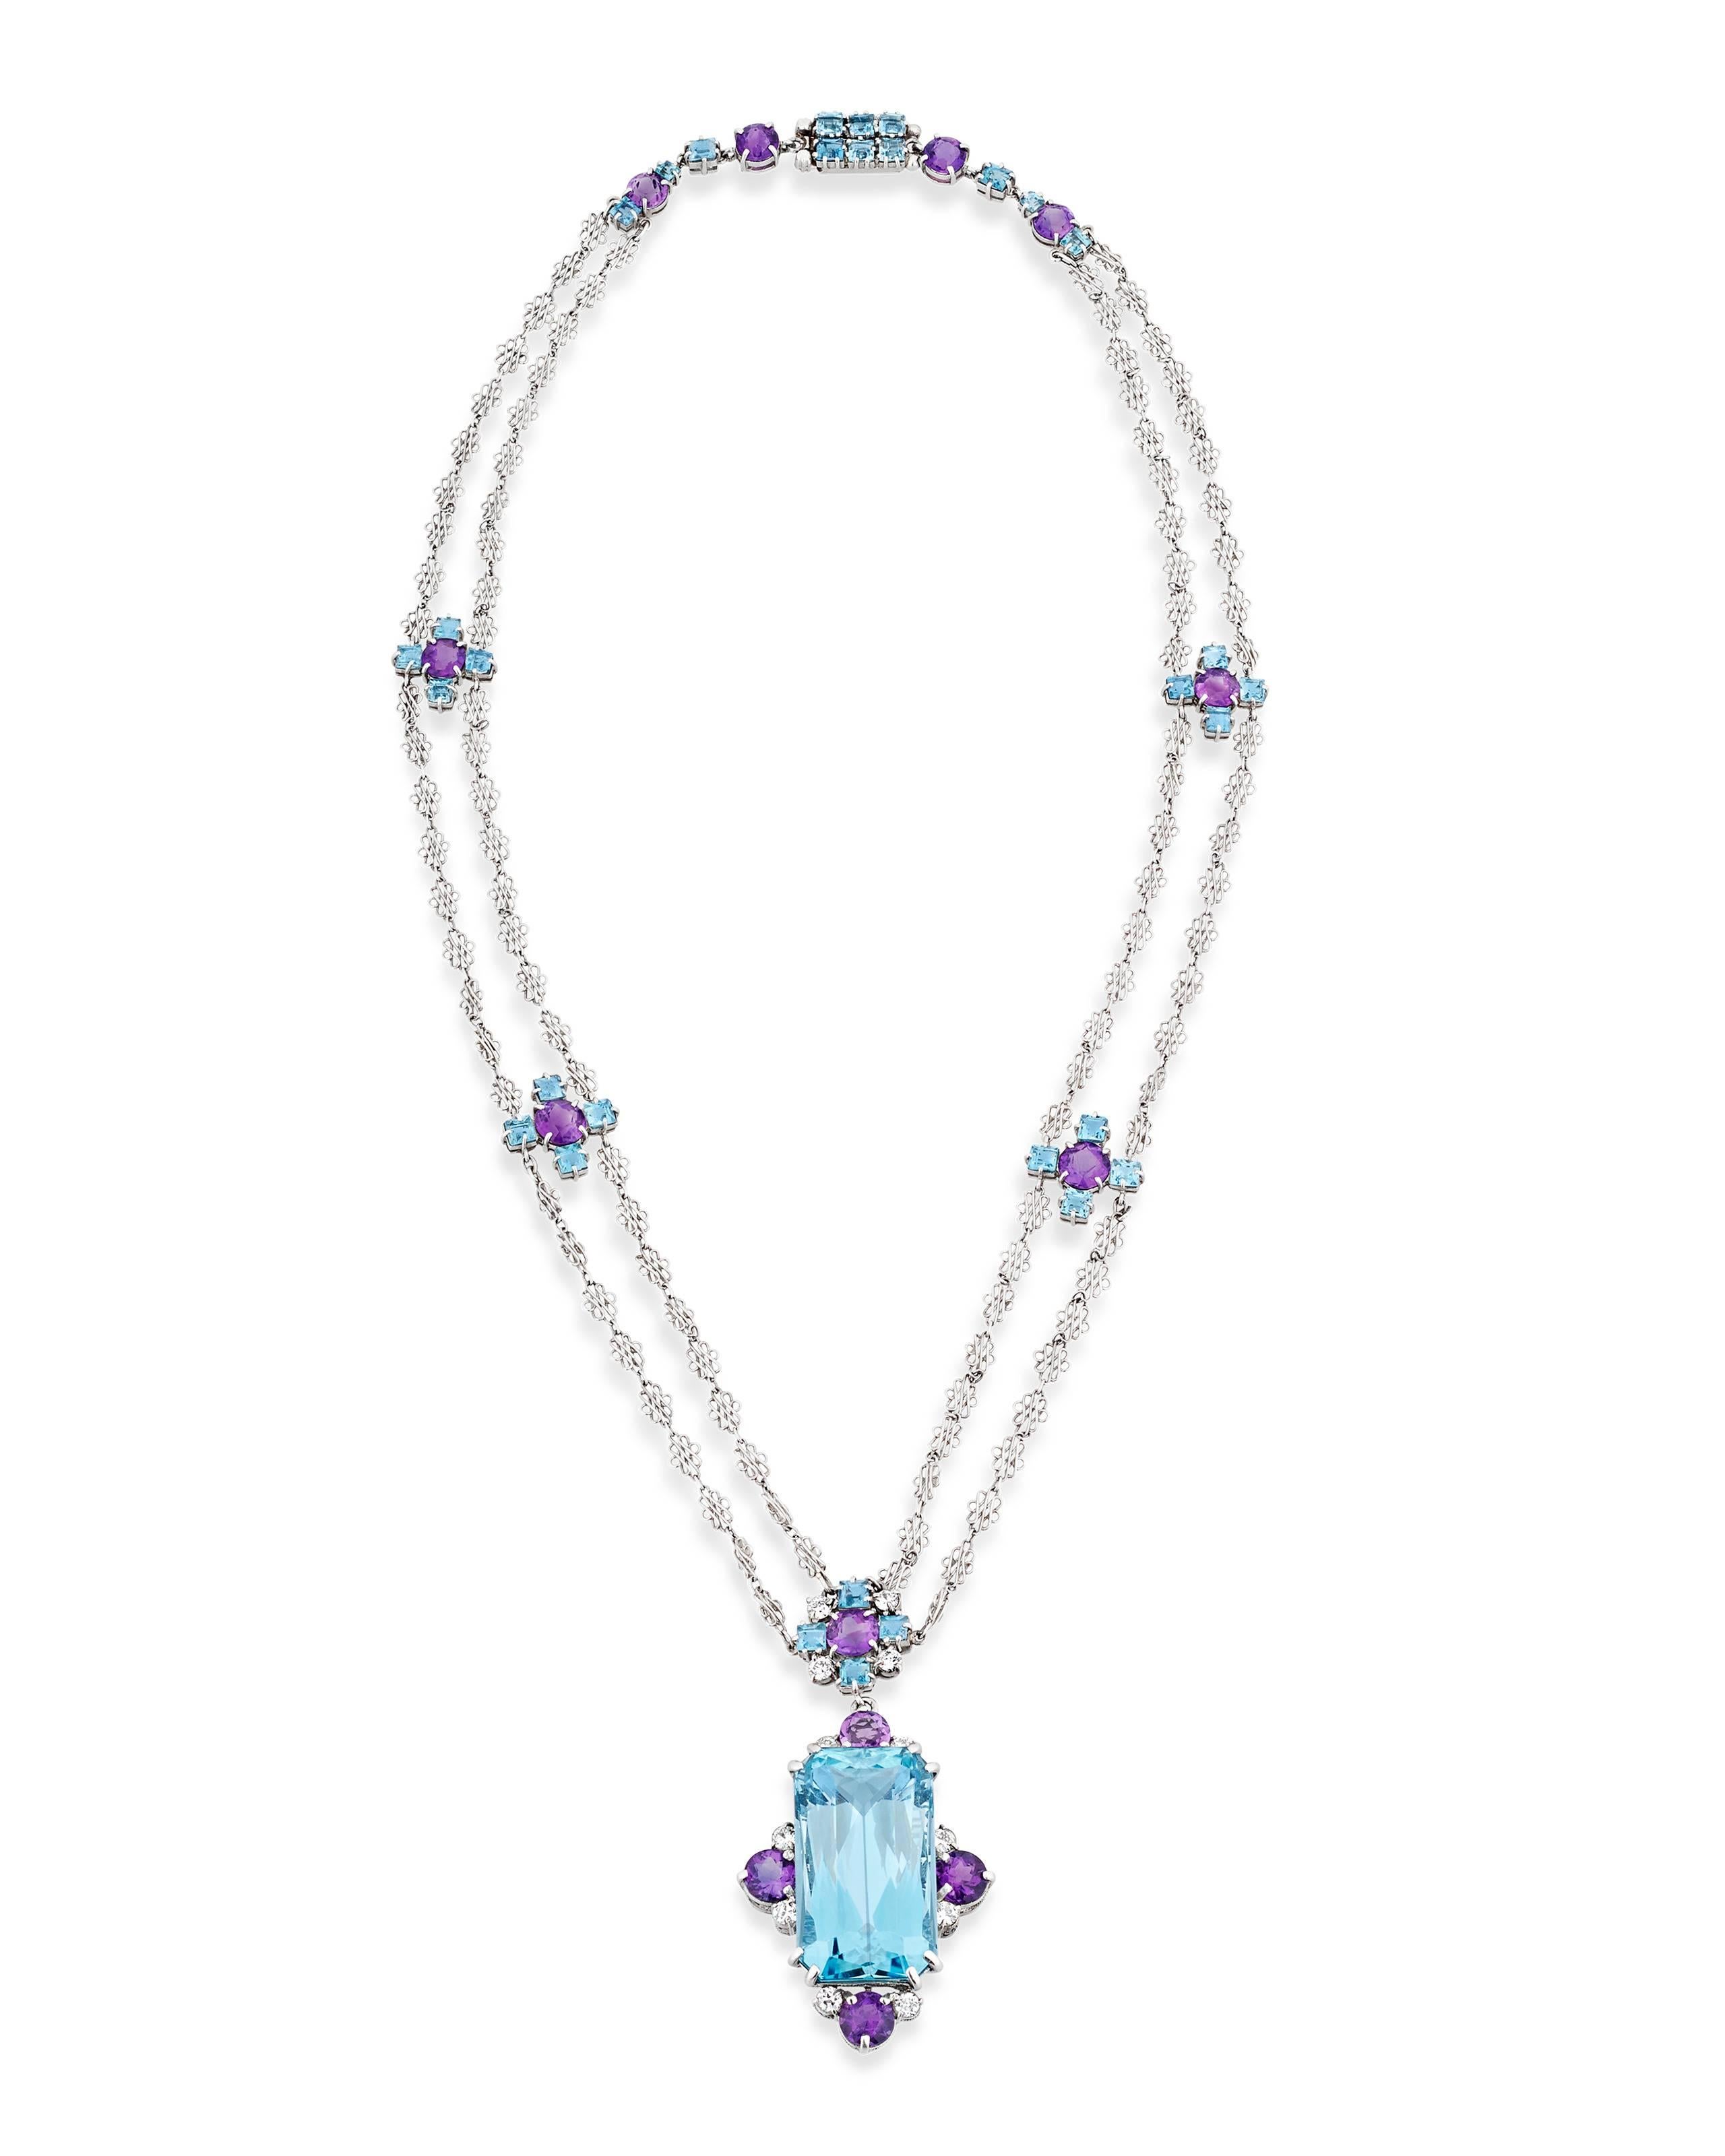 Crafted by the legendary Tiffany Studios and retailed by Tiffany & Co., this extraordinary aquamarine and amethyst necklace is a rare and unique masterpiece of jewelry design. A large faceted aquamarine weighing approximately 12.00 carats is the